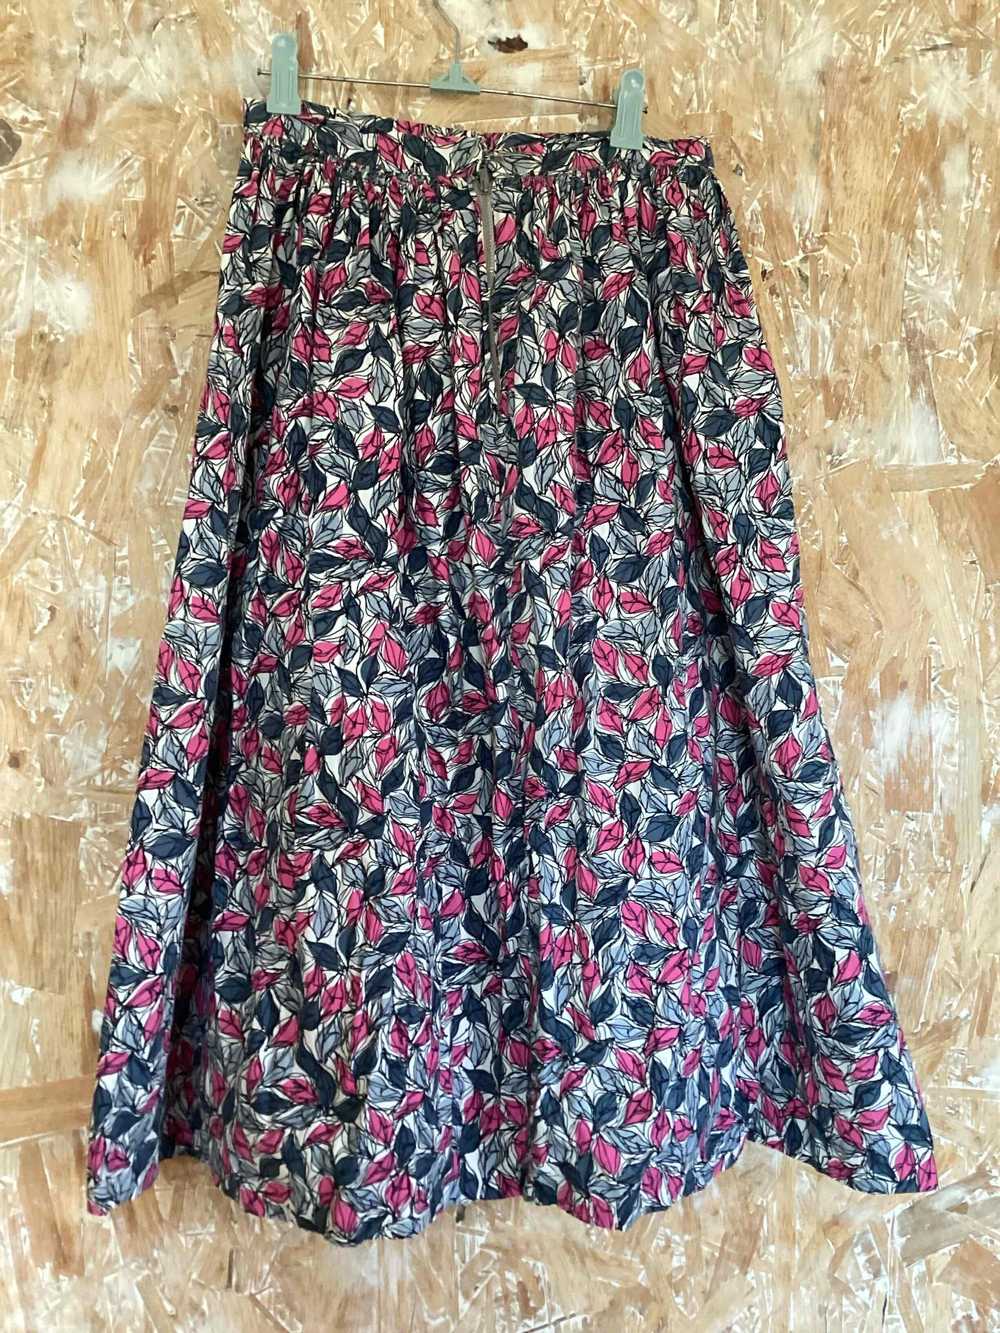 Cotton skirt - Floral cotton skirt 1960, made by … - image 2